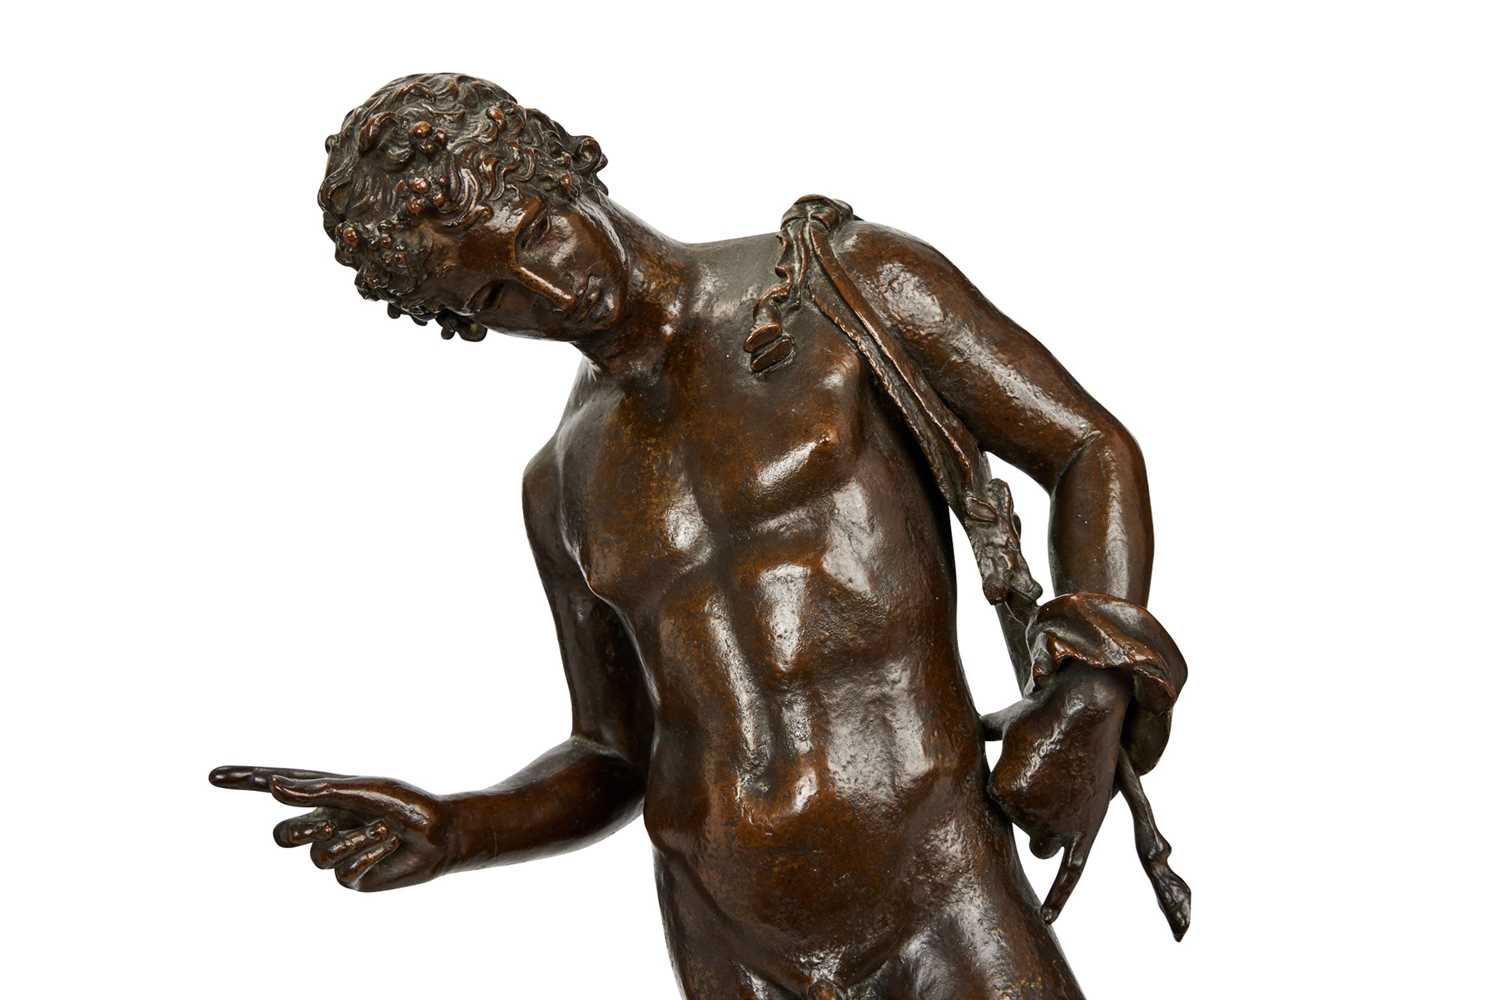 A LARGE 19TH CENTURY NEAPOLITAN BRONZE FIGURE OF NARCISSUS, AFTER THE ANTIQUE - Image 4 of 4